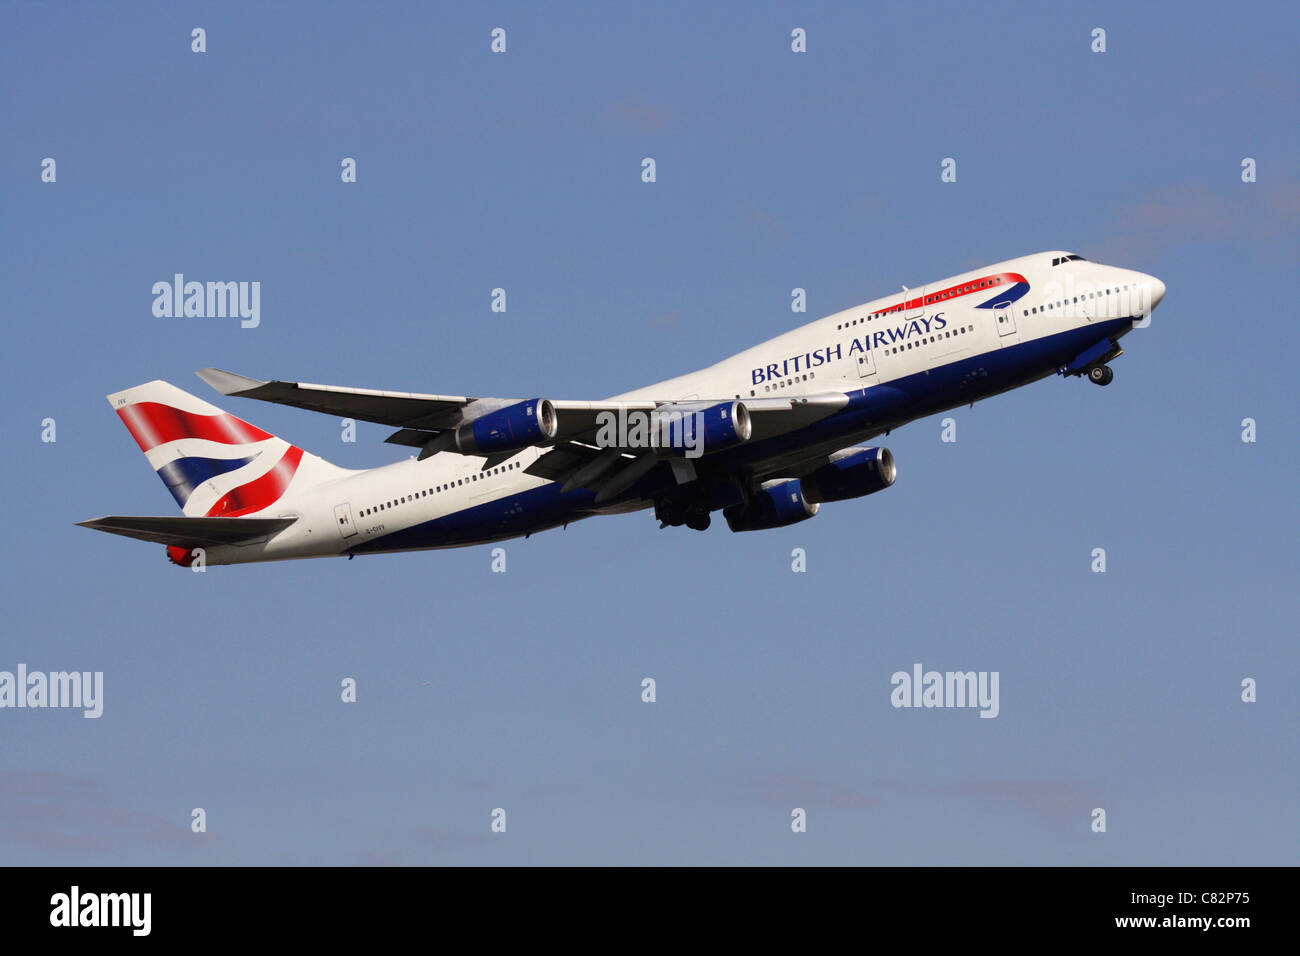 British Airways Boeing 747-400 jumbo jet plane climbing on takeoff against a clear blue sky. Side view. Stock Photo